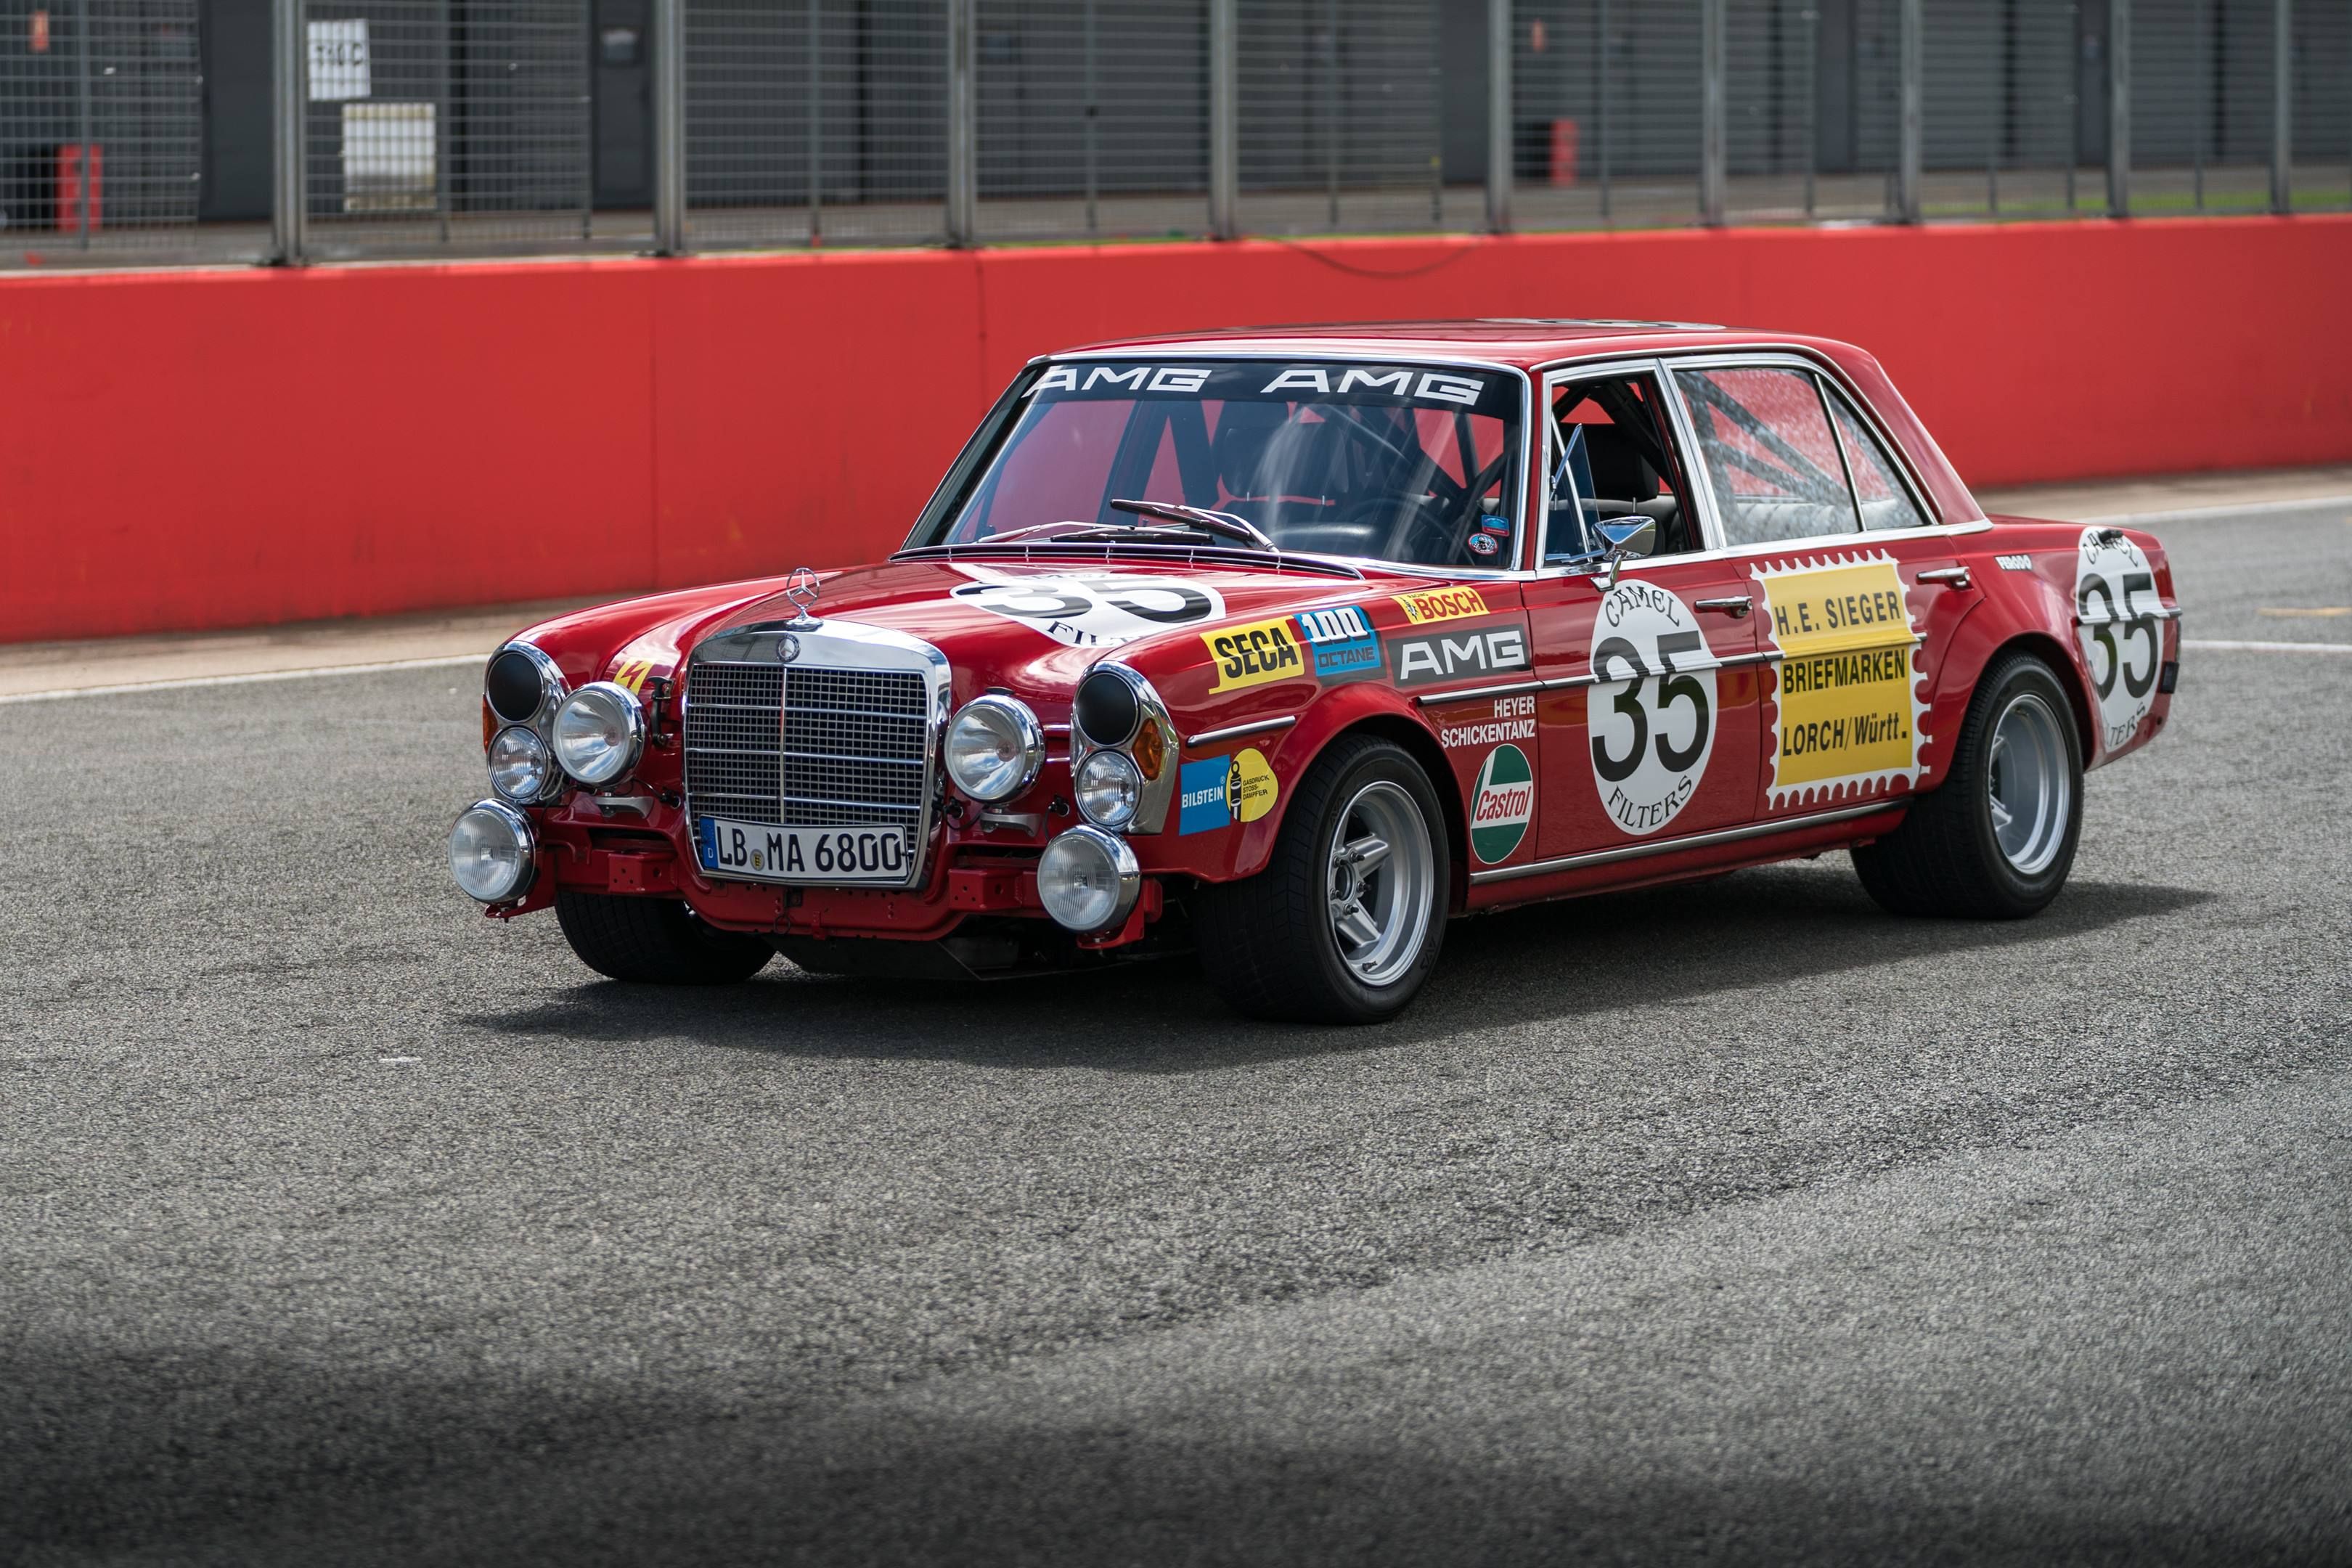 1971 300 SEL 6.8 AMG “The Red Pig”